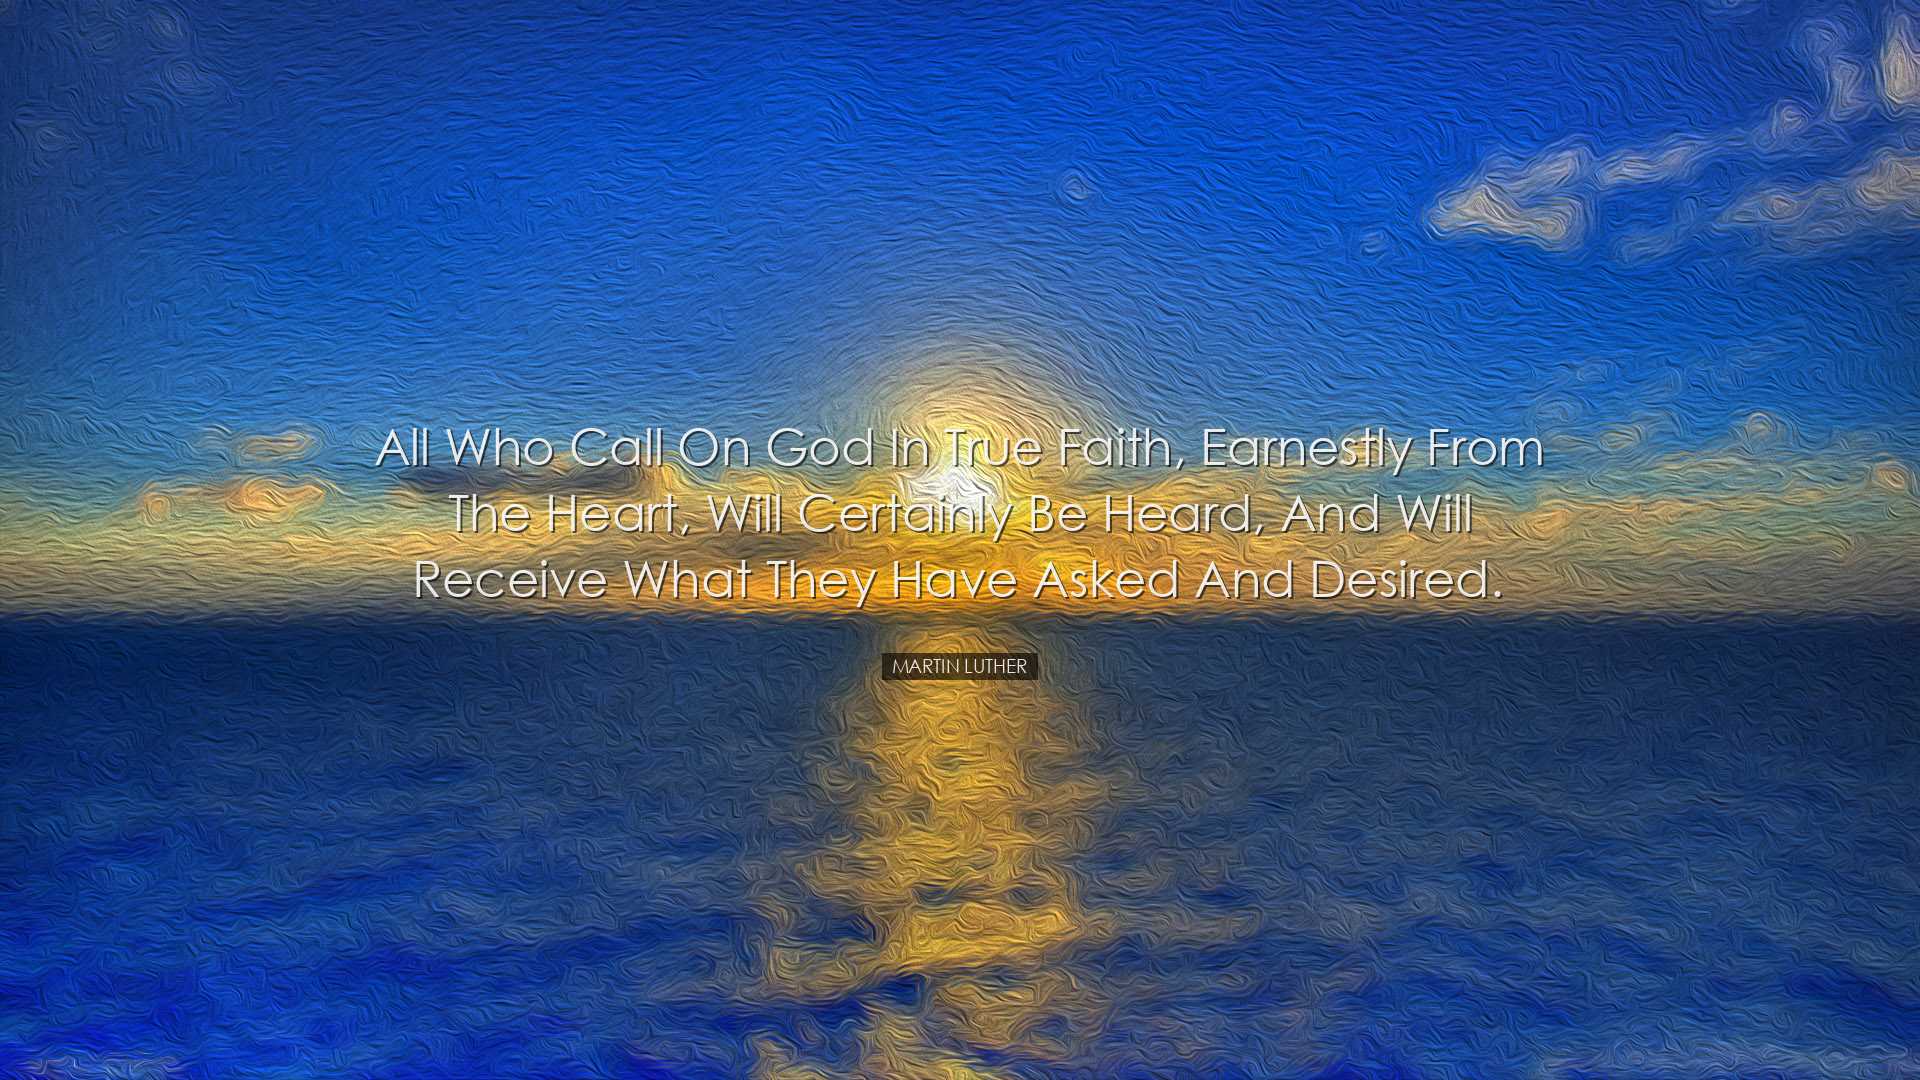 All who call on God in true faith, earnestly from the heart, will